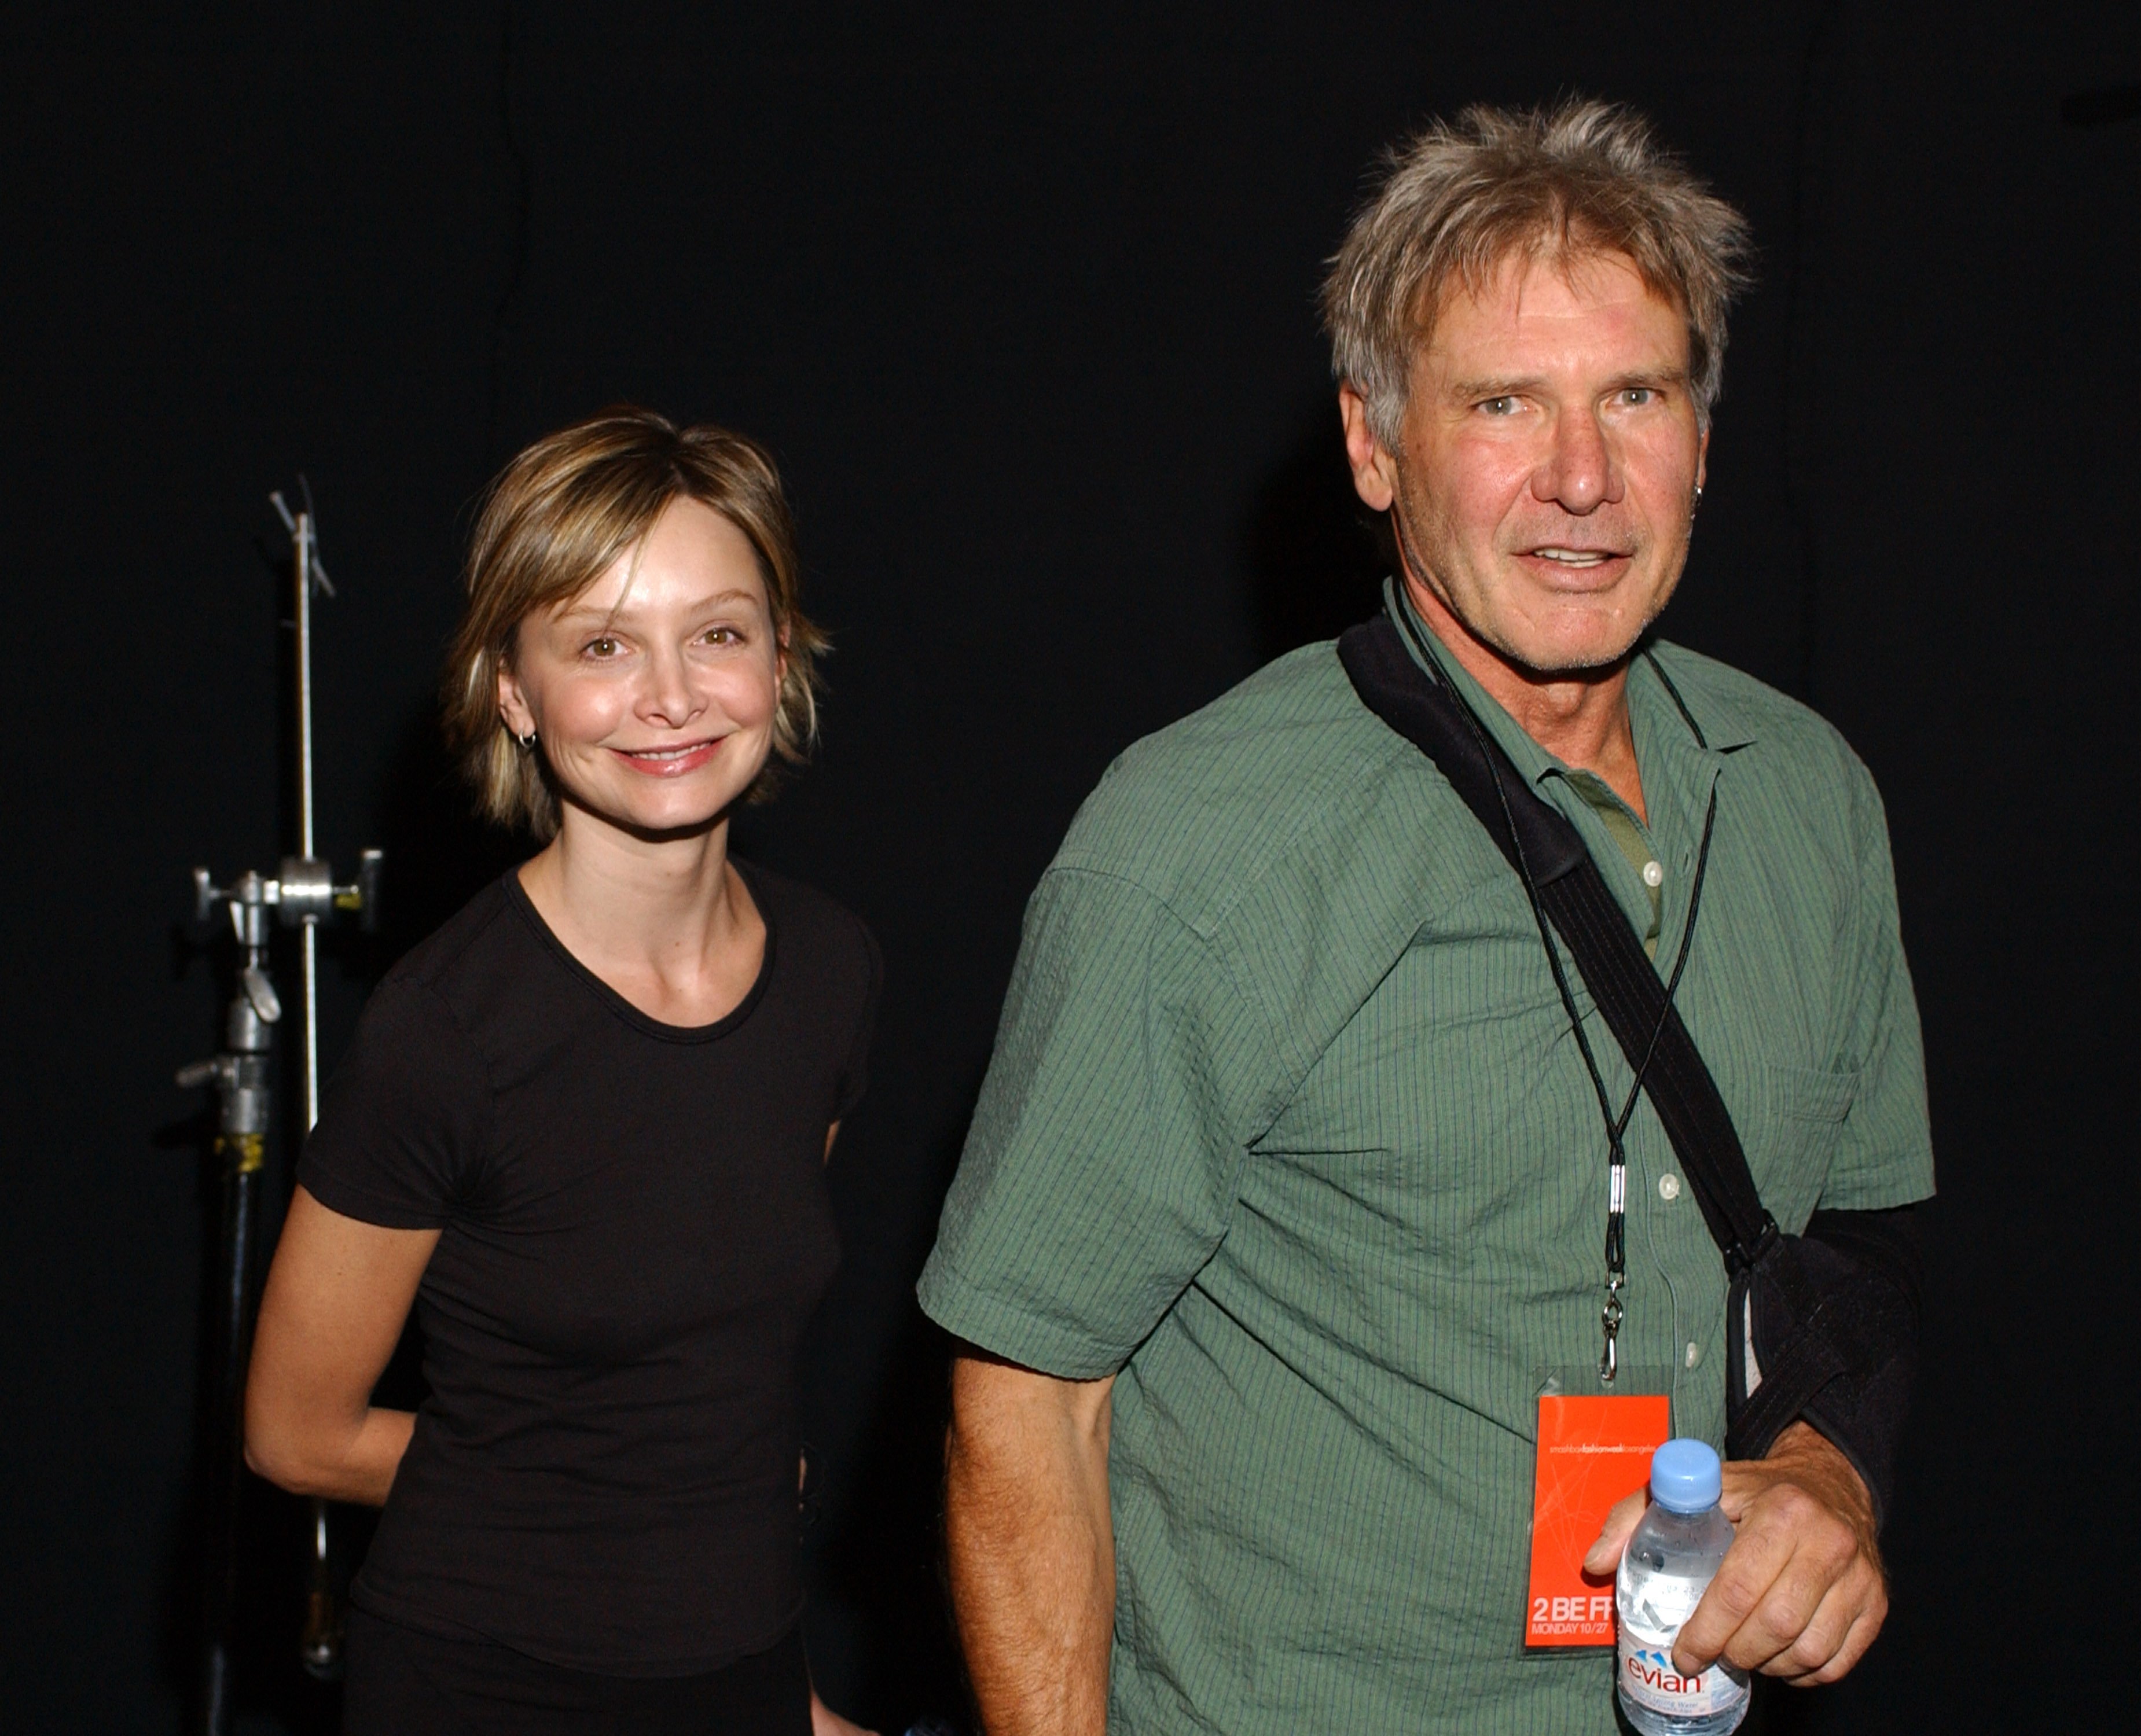 Calista Flockart and Harrison Ford at Smashbox LA Fashion Week Spring 2004 - 2 B Free Front Row at Smashbox Studios in Culver City, California | Source: Getty Images